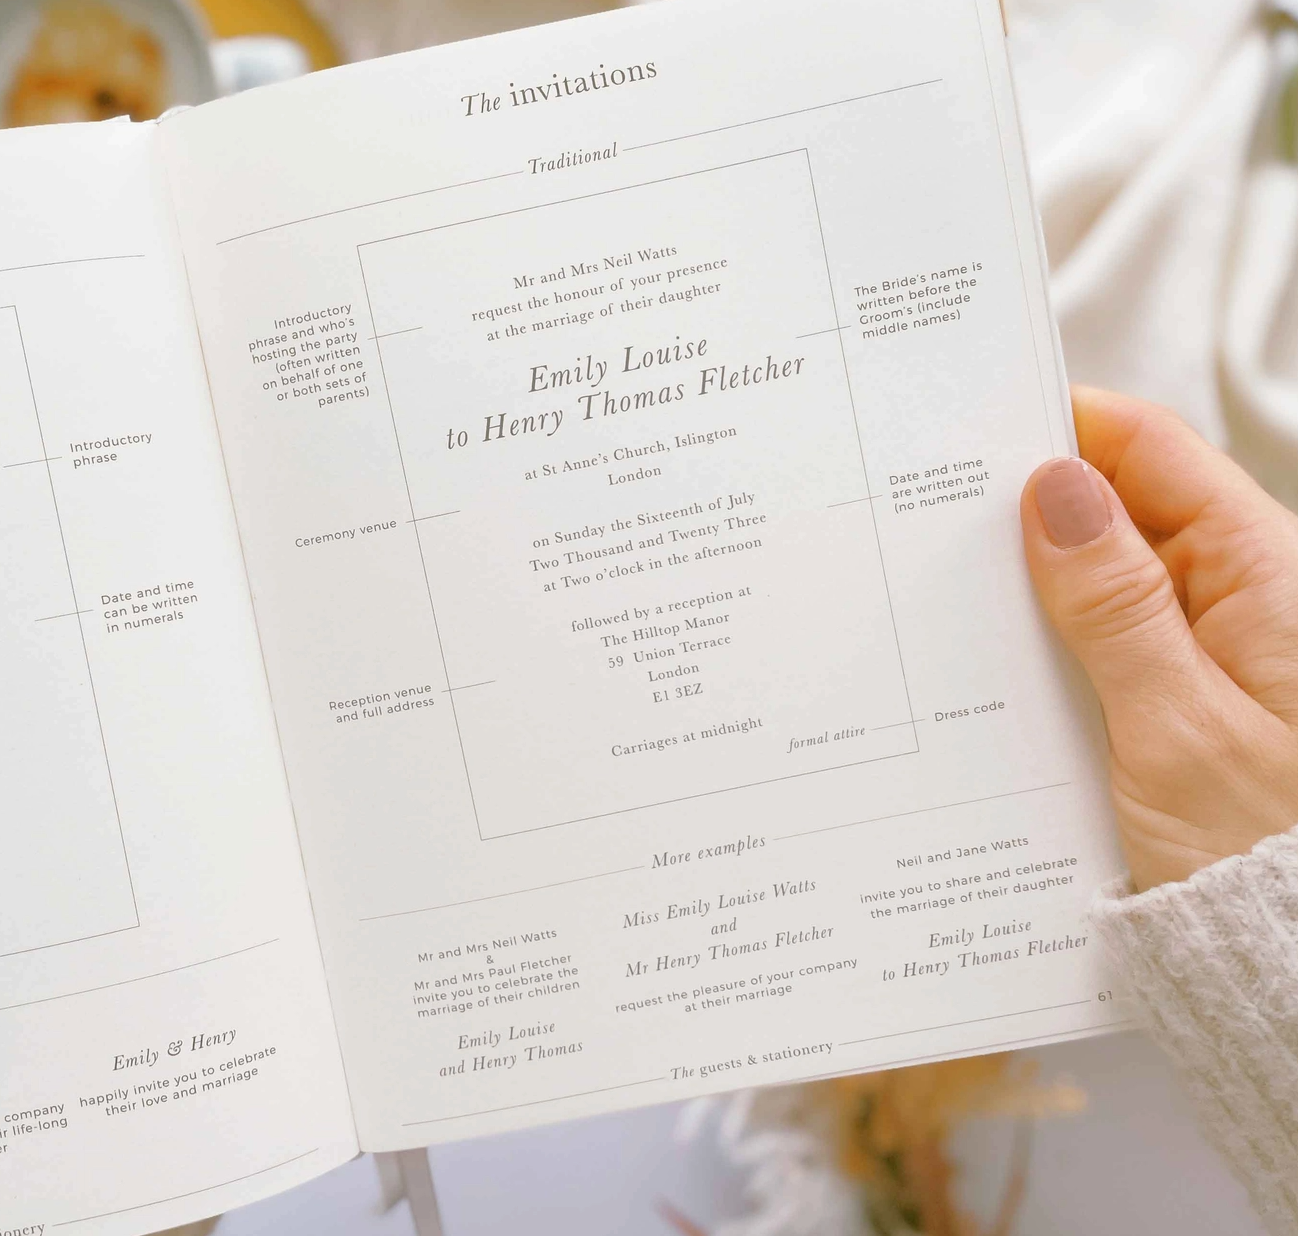 Gold-trimmed wedding planner: where dreams become plans.